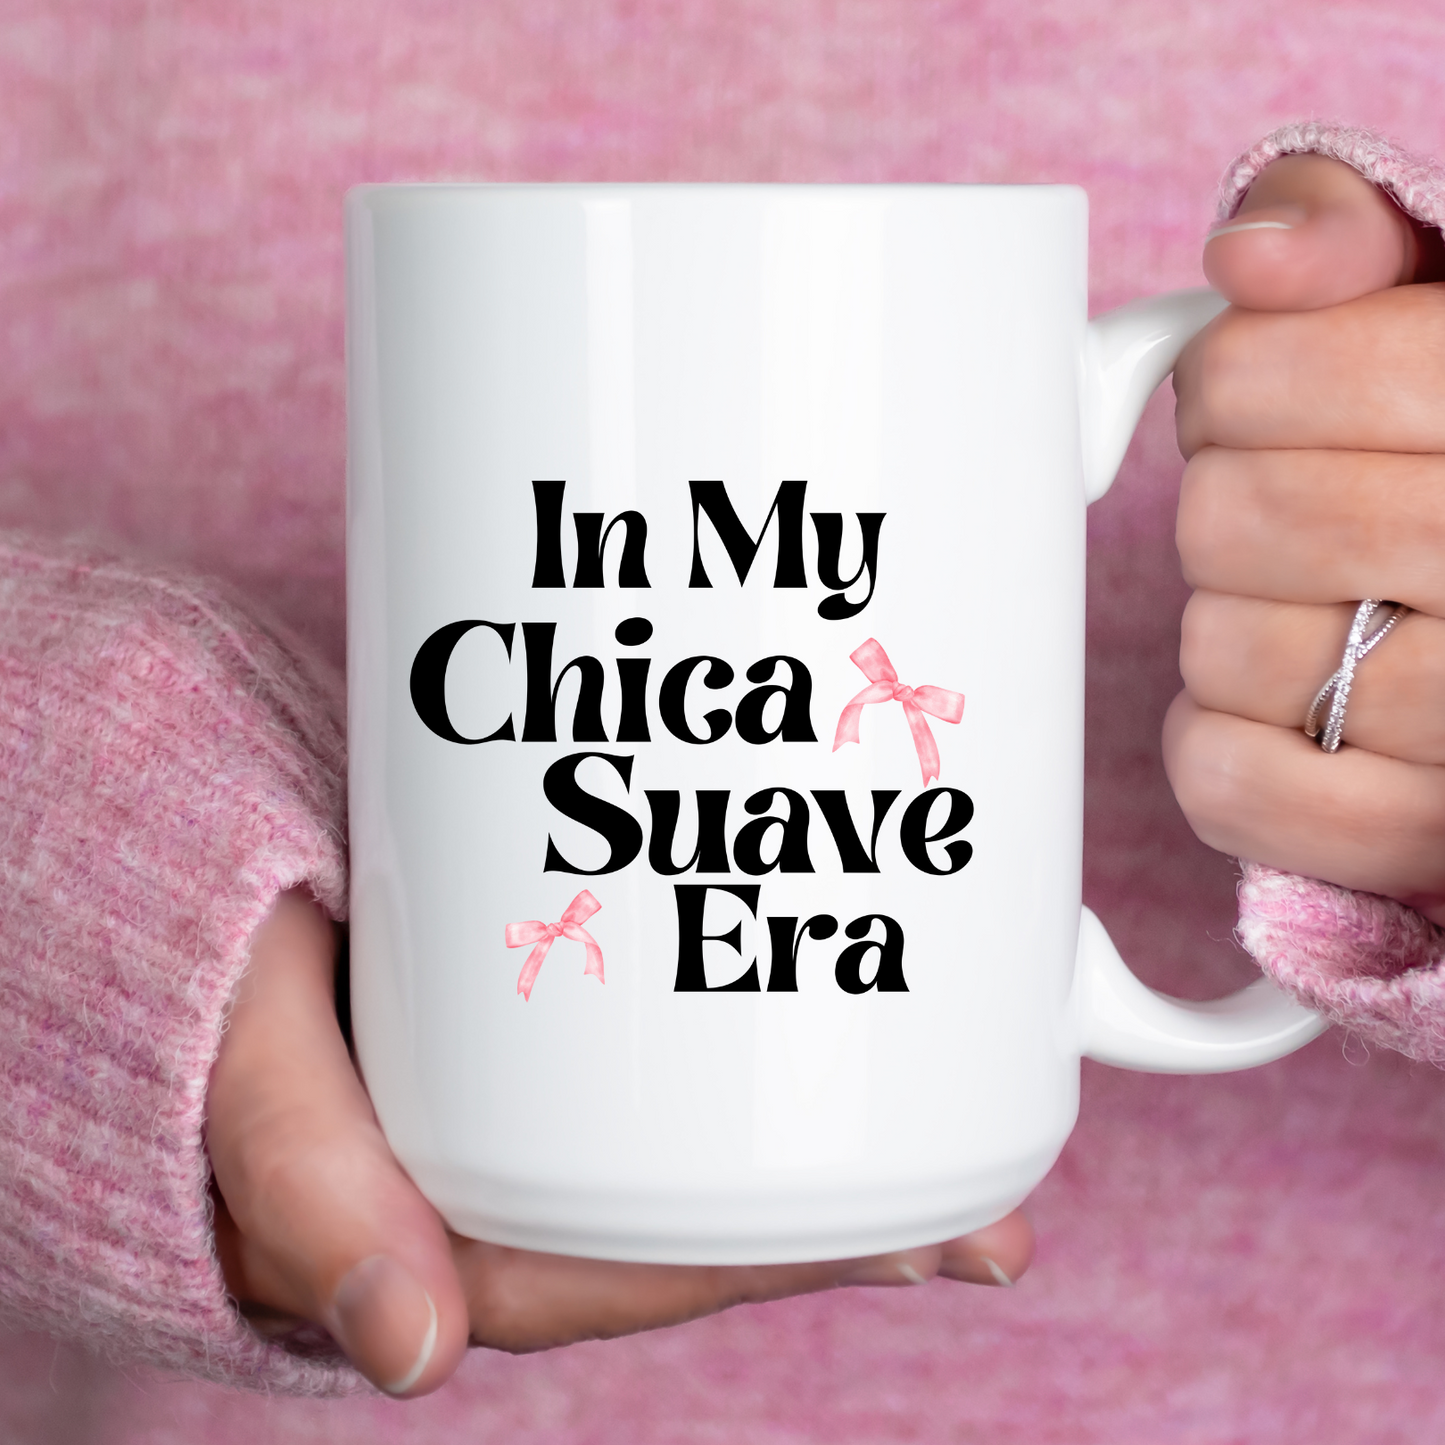 In my Chica Suave Era Latina PNG & SVG- Digital Download